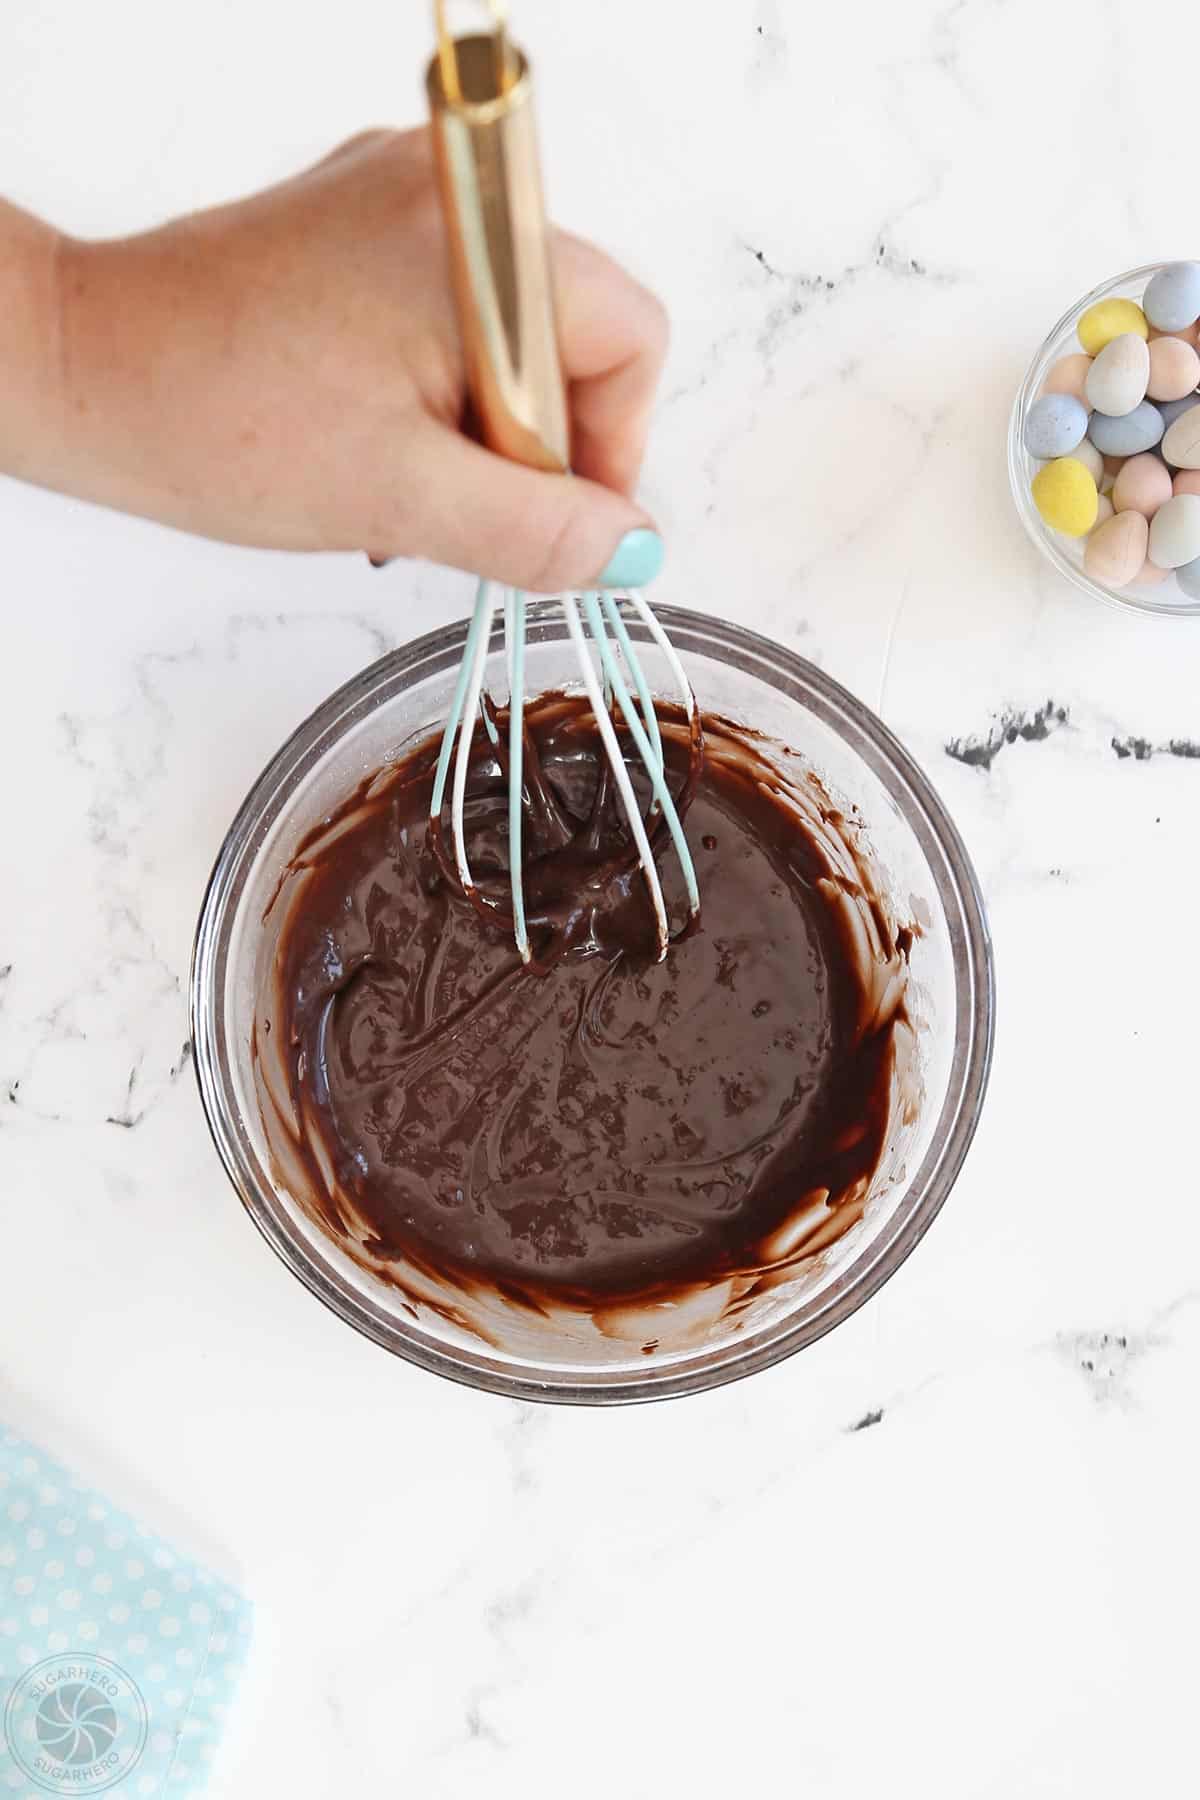 Whisking together all ingredients to make chocolate frosting.